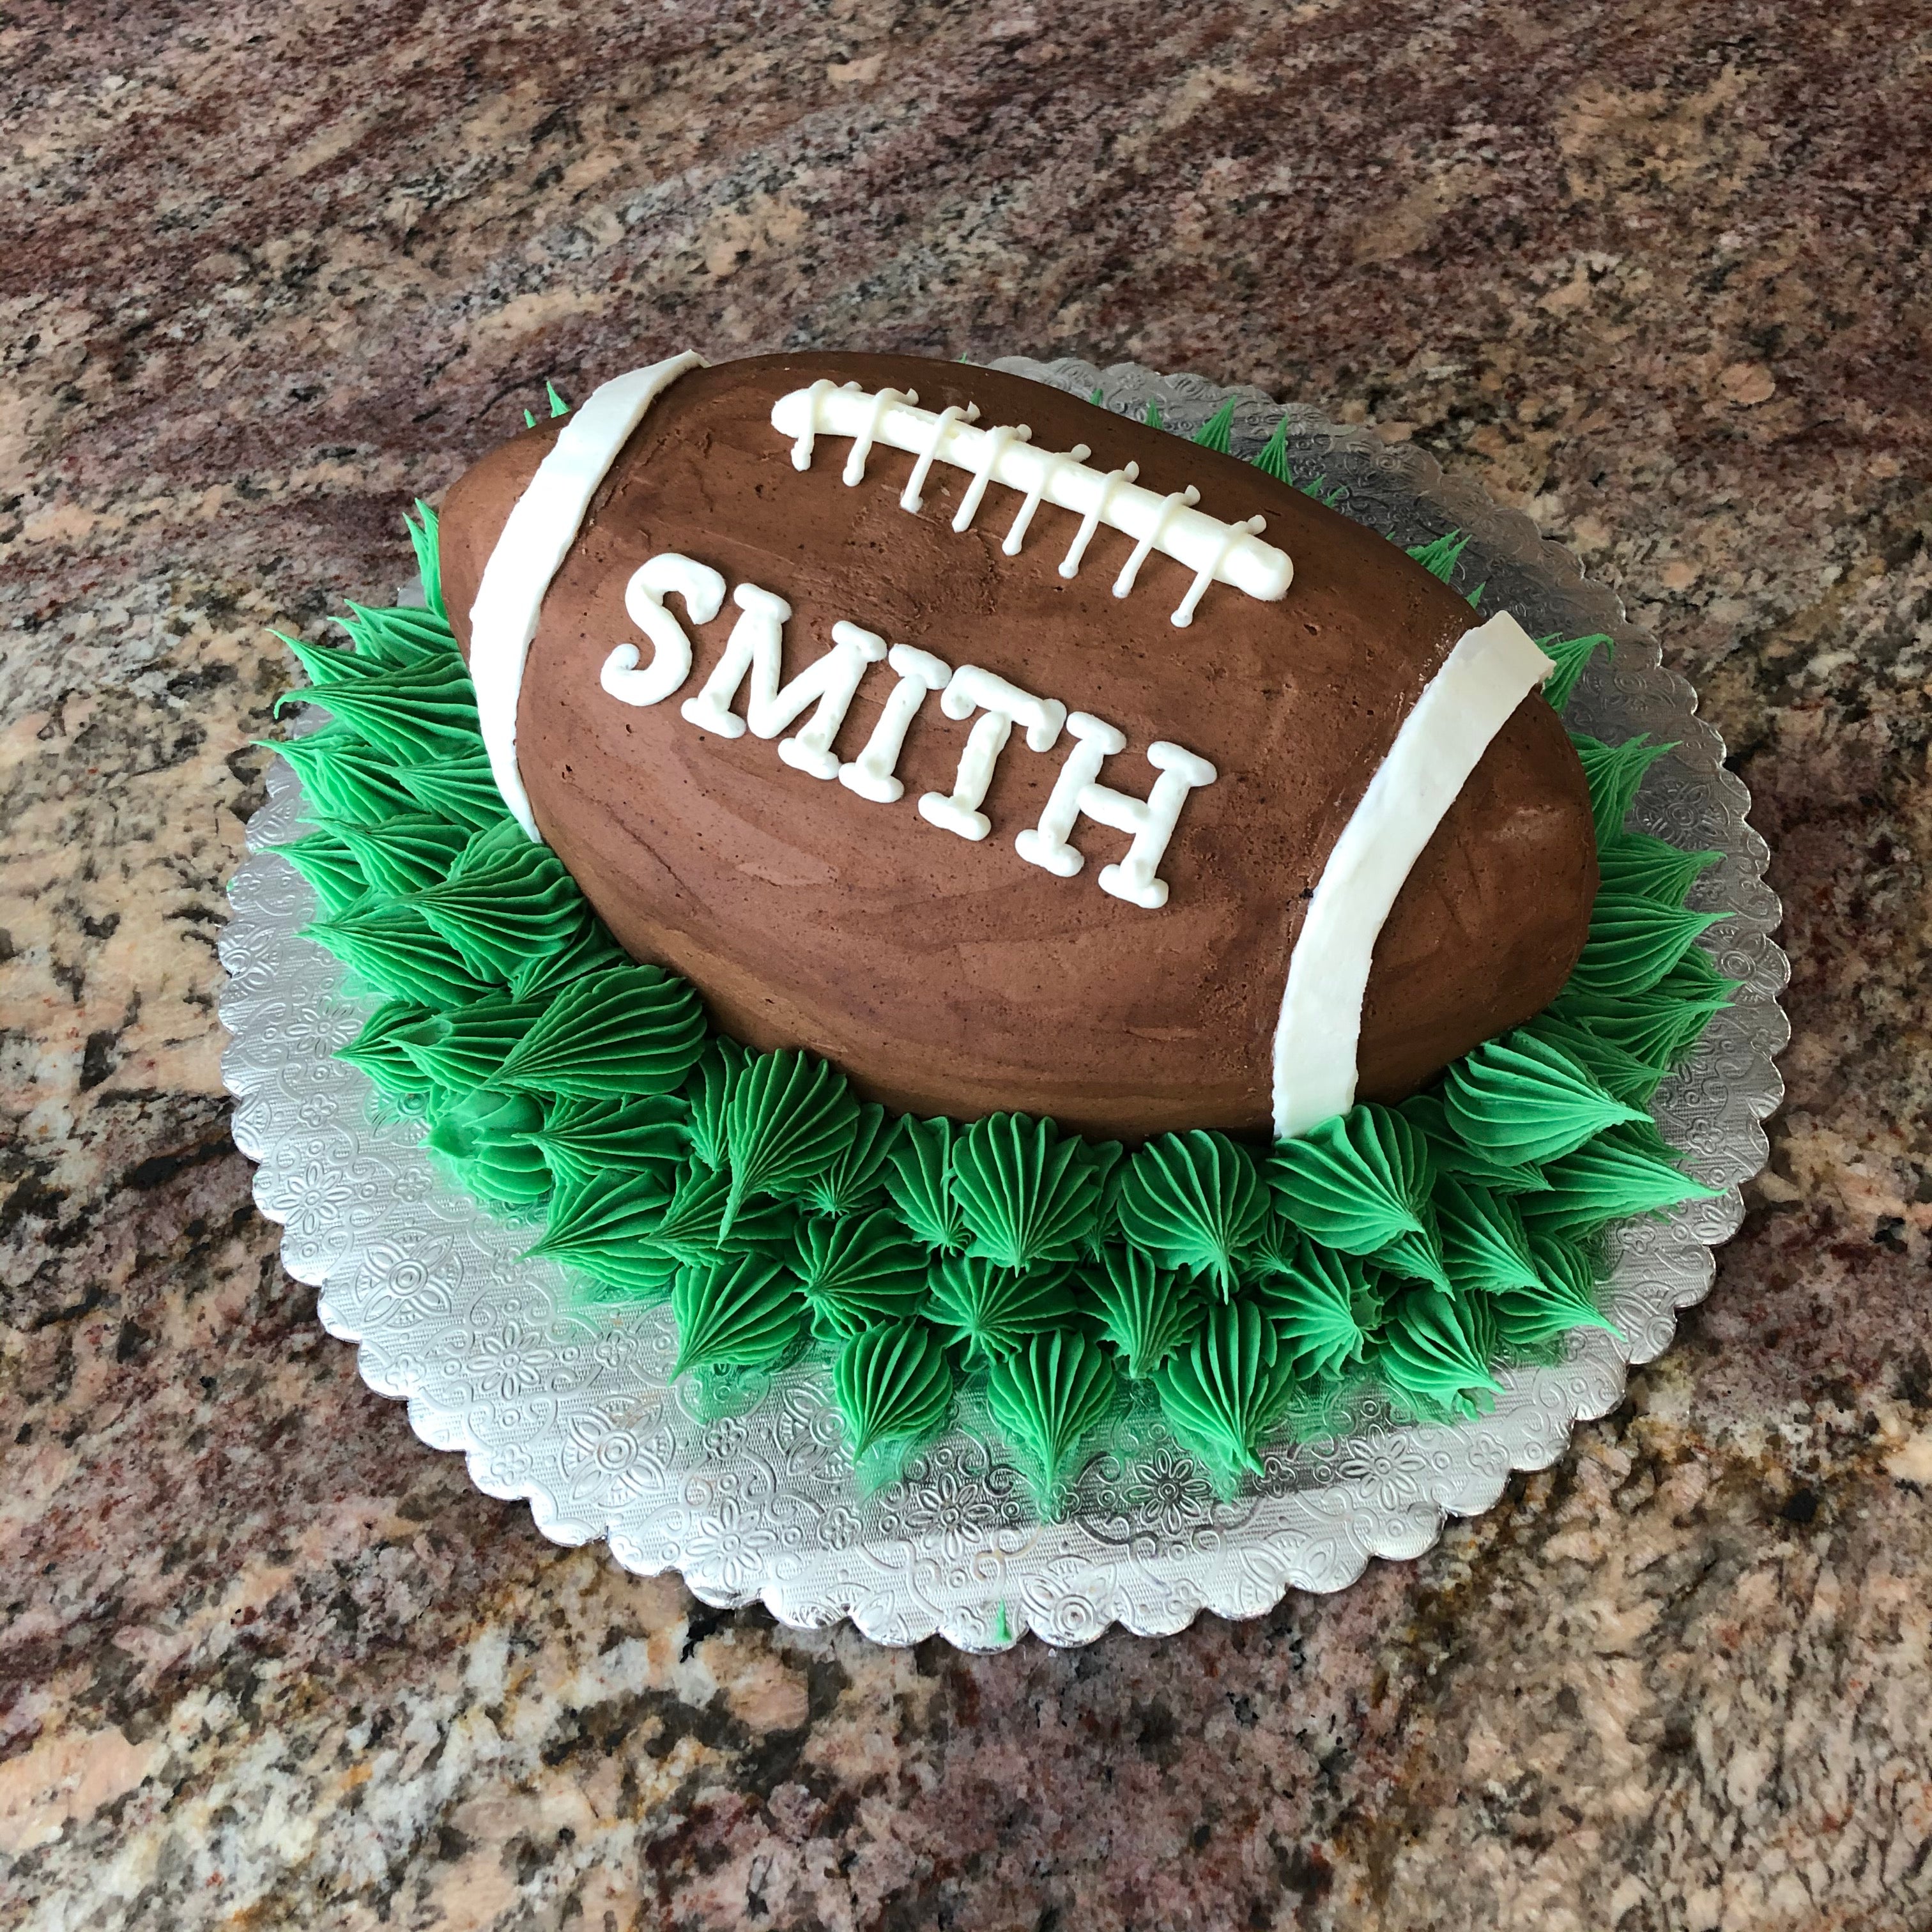 American football cake | By Cupcakery House by AJCFacebook